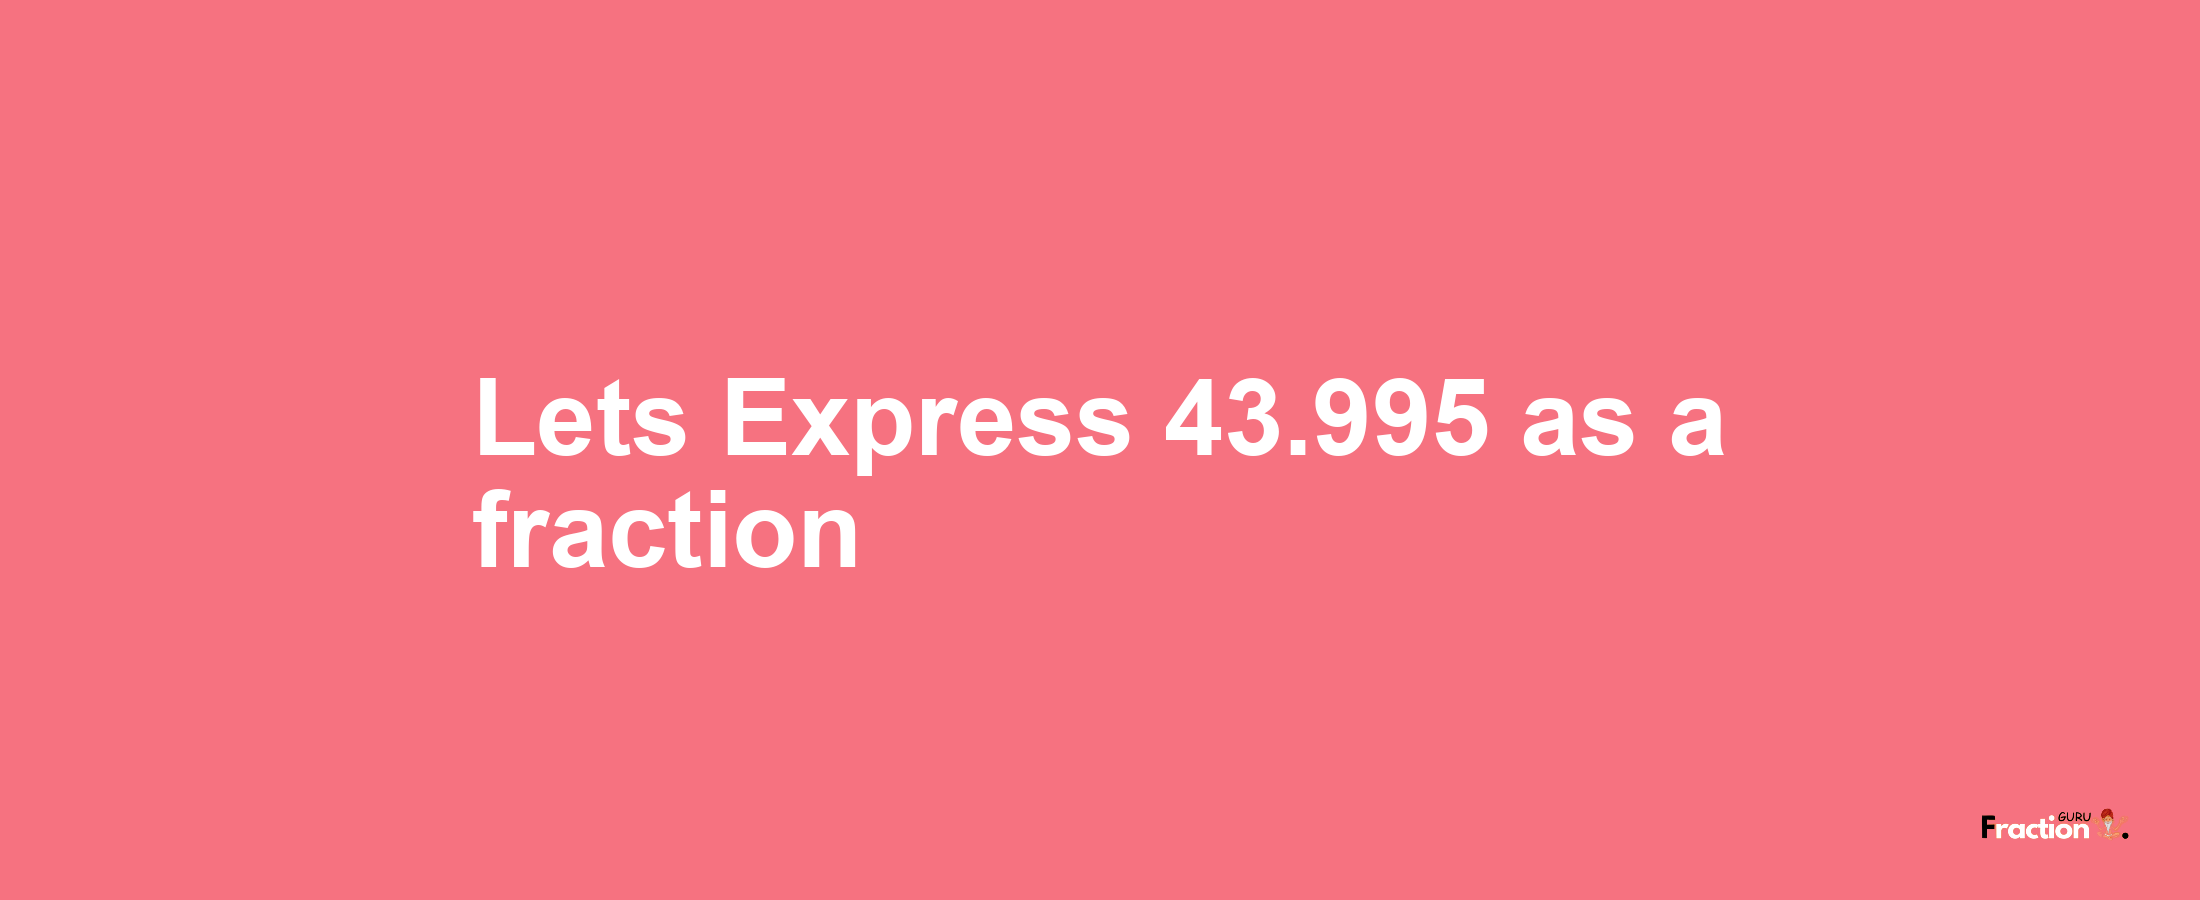 Lets Express 43.995 as afraction